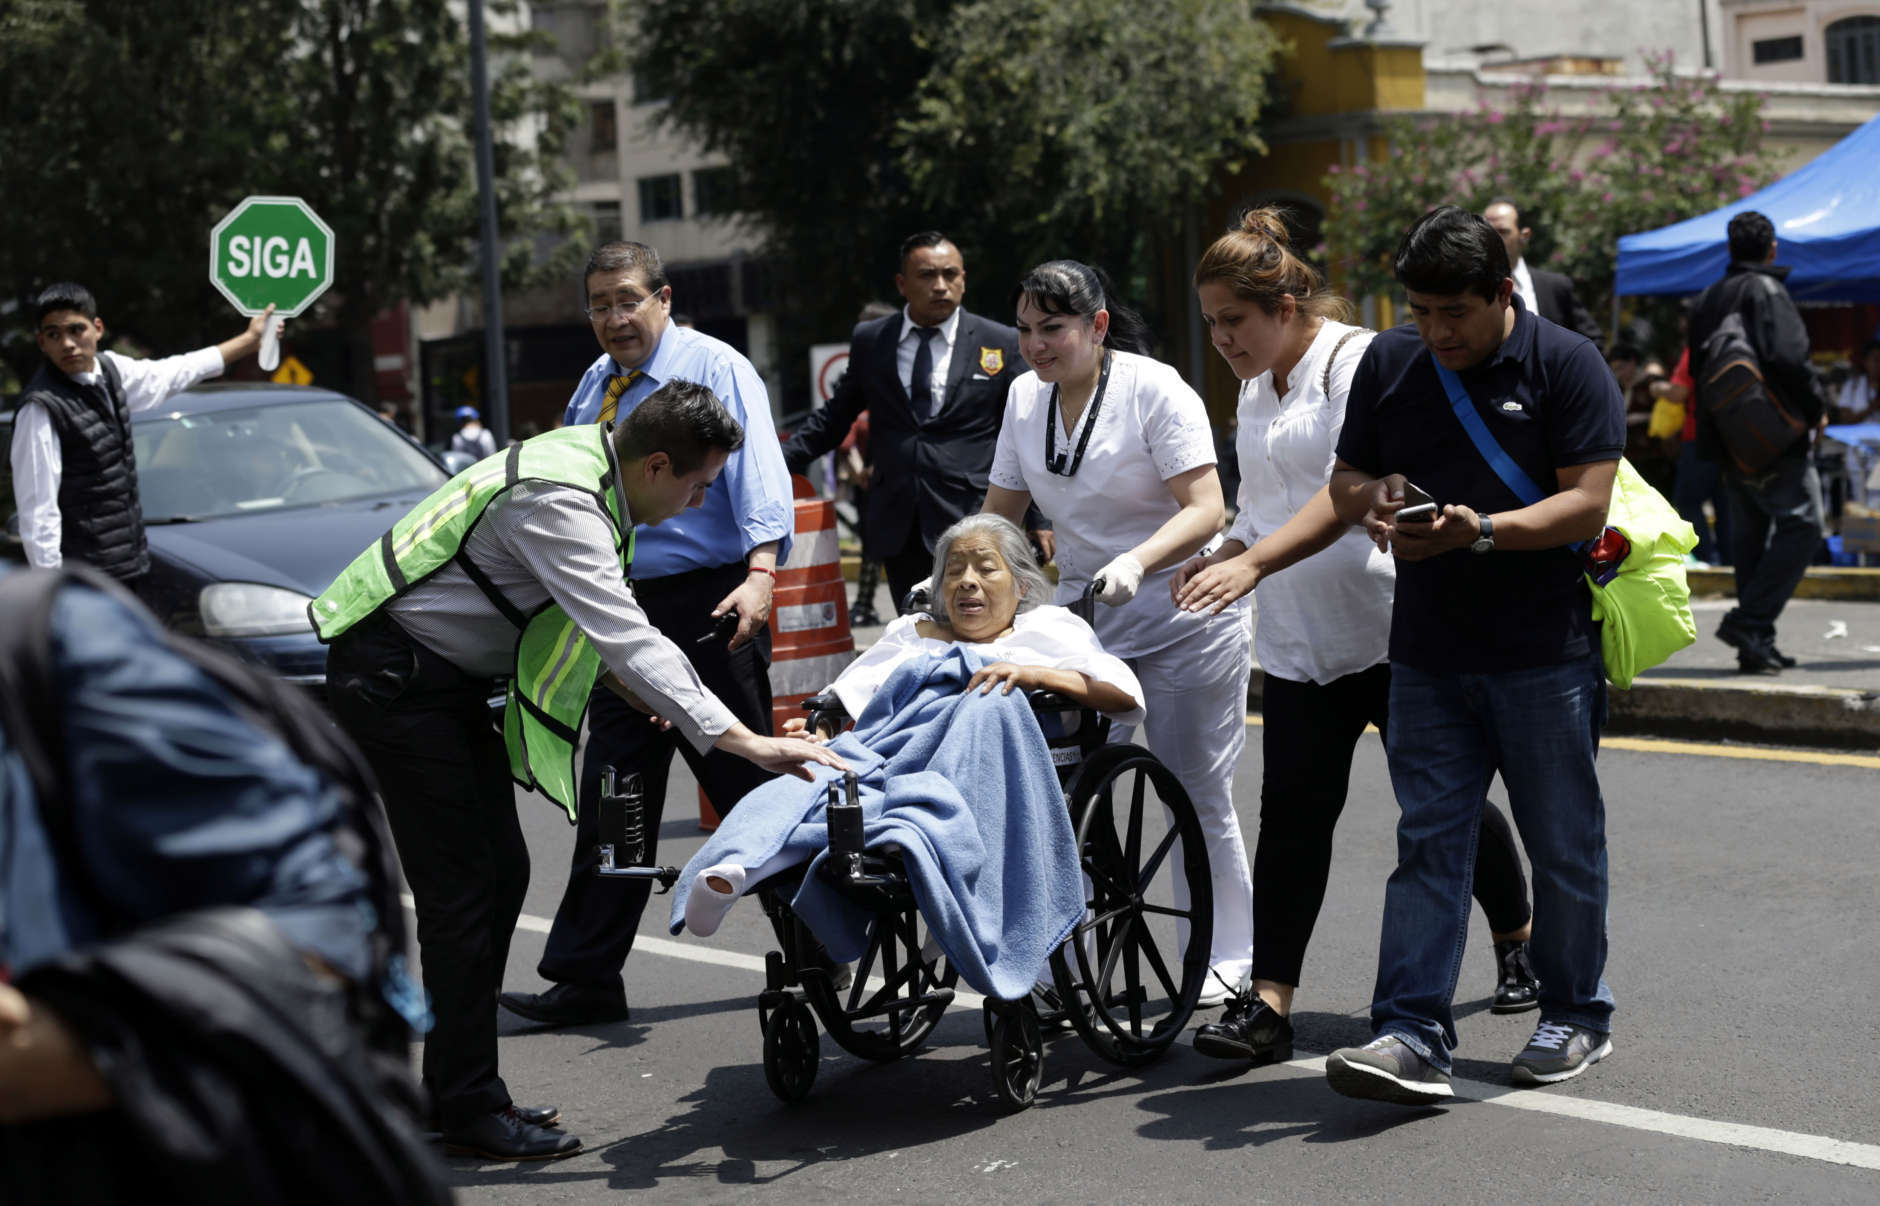 A woman in a wheelchair is evacuated from a clinic as people gather along Paseo de la Reforma Avenue after an earthquake in Mexico City, Tuesday Sept. 19, 2017. A powerful earthquake jolted central Mexico on Tuesday, causing buildings to sway sickeningly in the capital on the anniversary of a 1985 quake that did major damage. (AP Photo/Marco Ugarte)